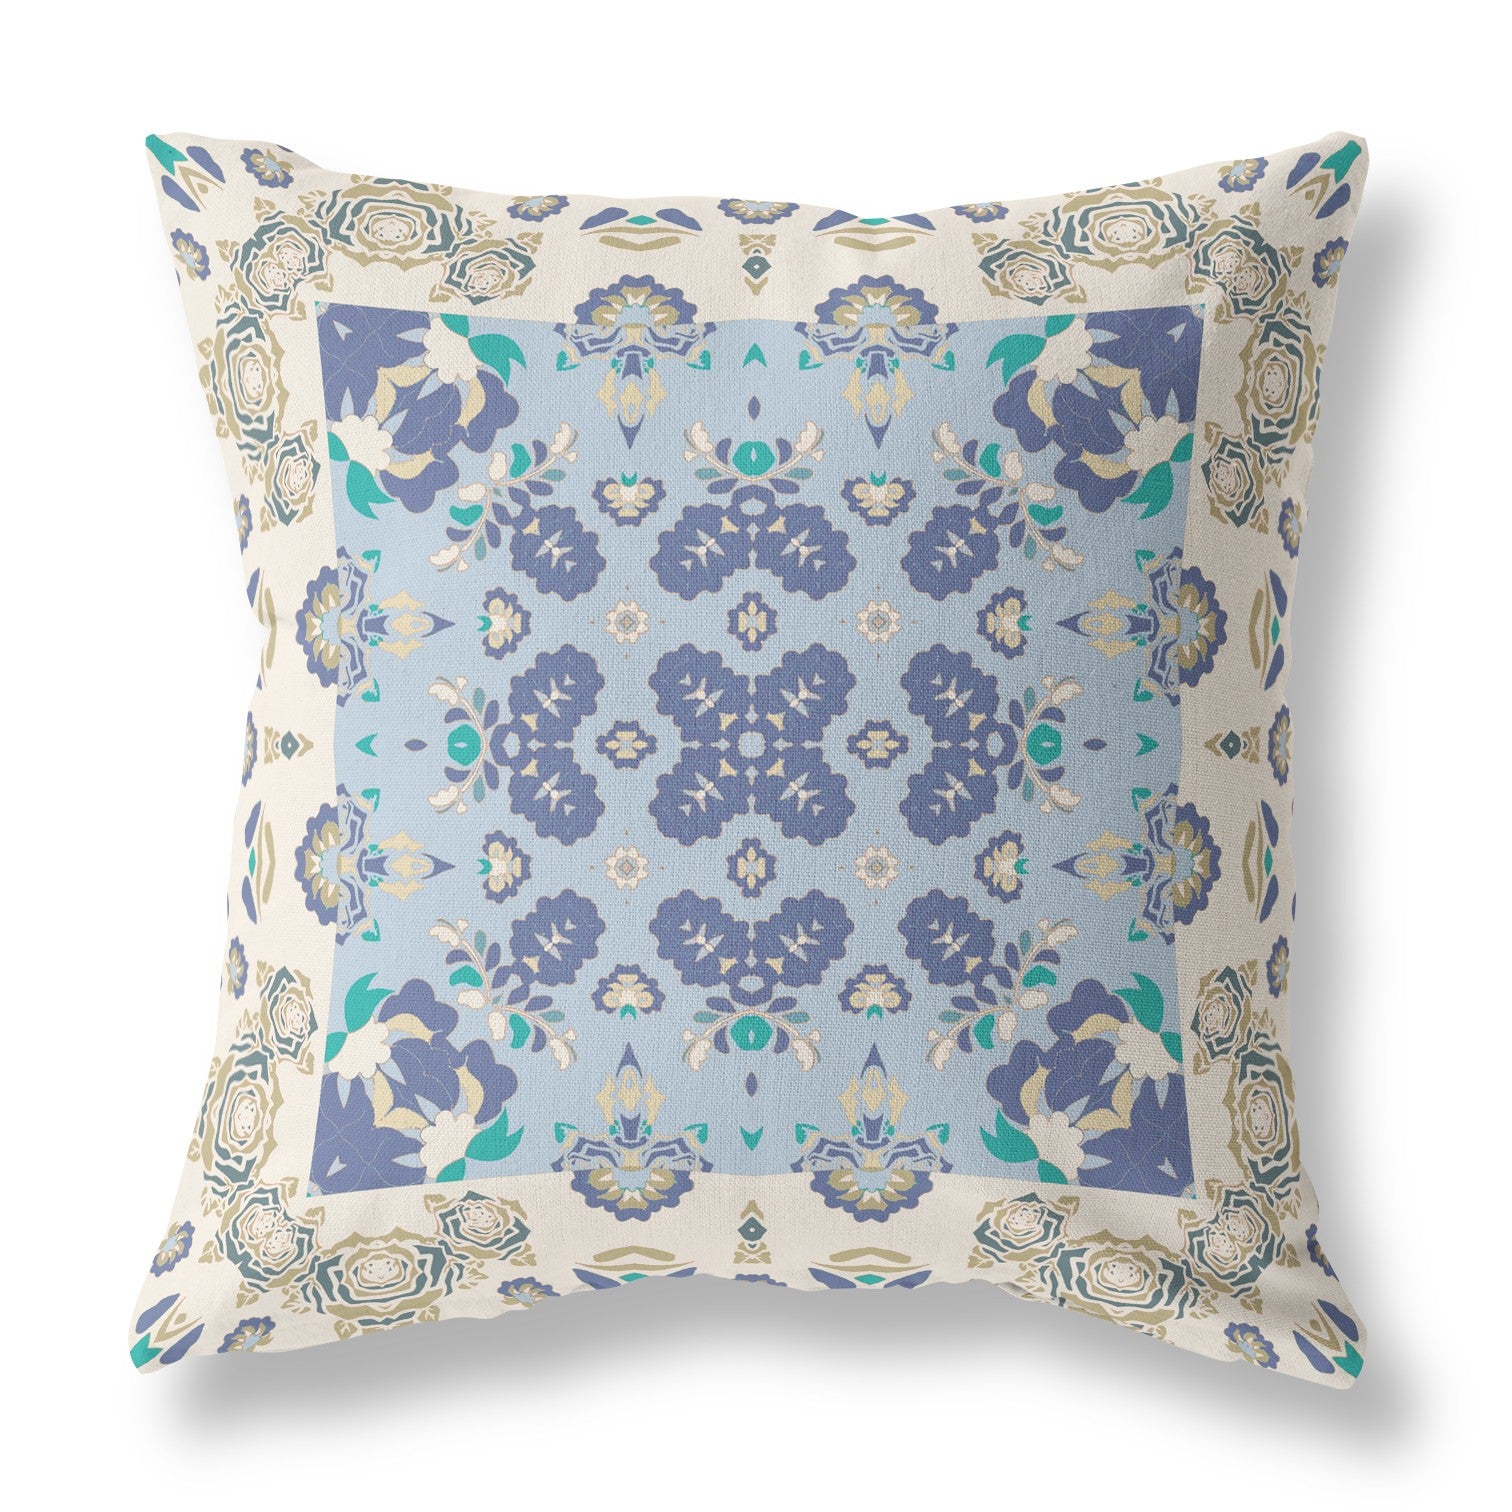 26” White Blue Rose Box Indoor Outdoor Zippered Throw Pillow